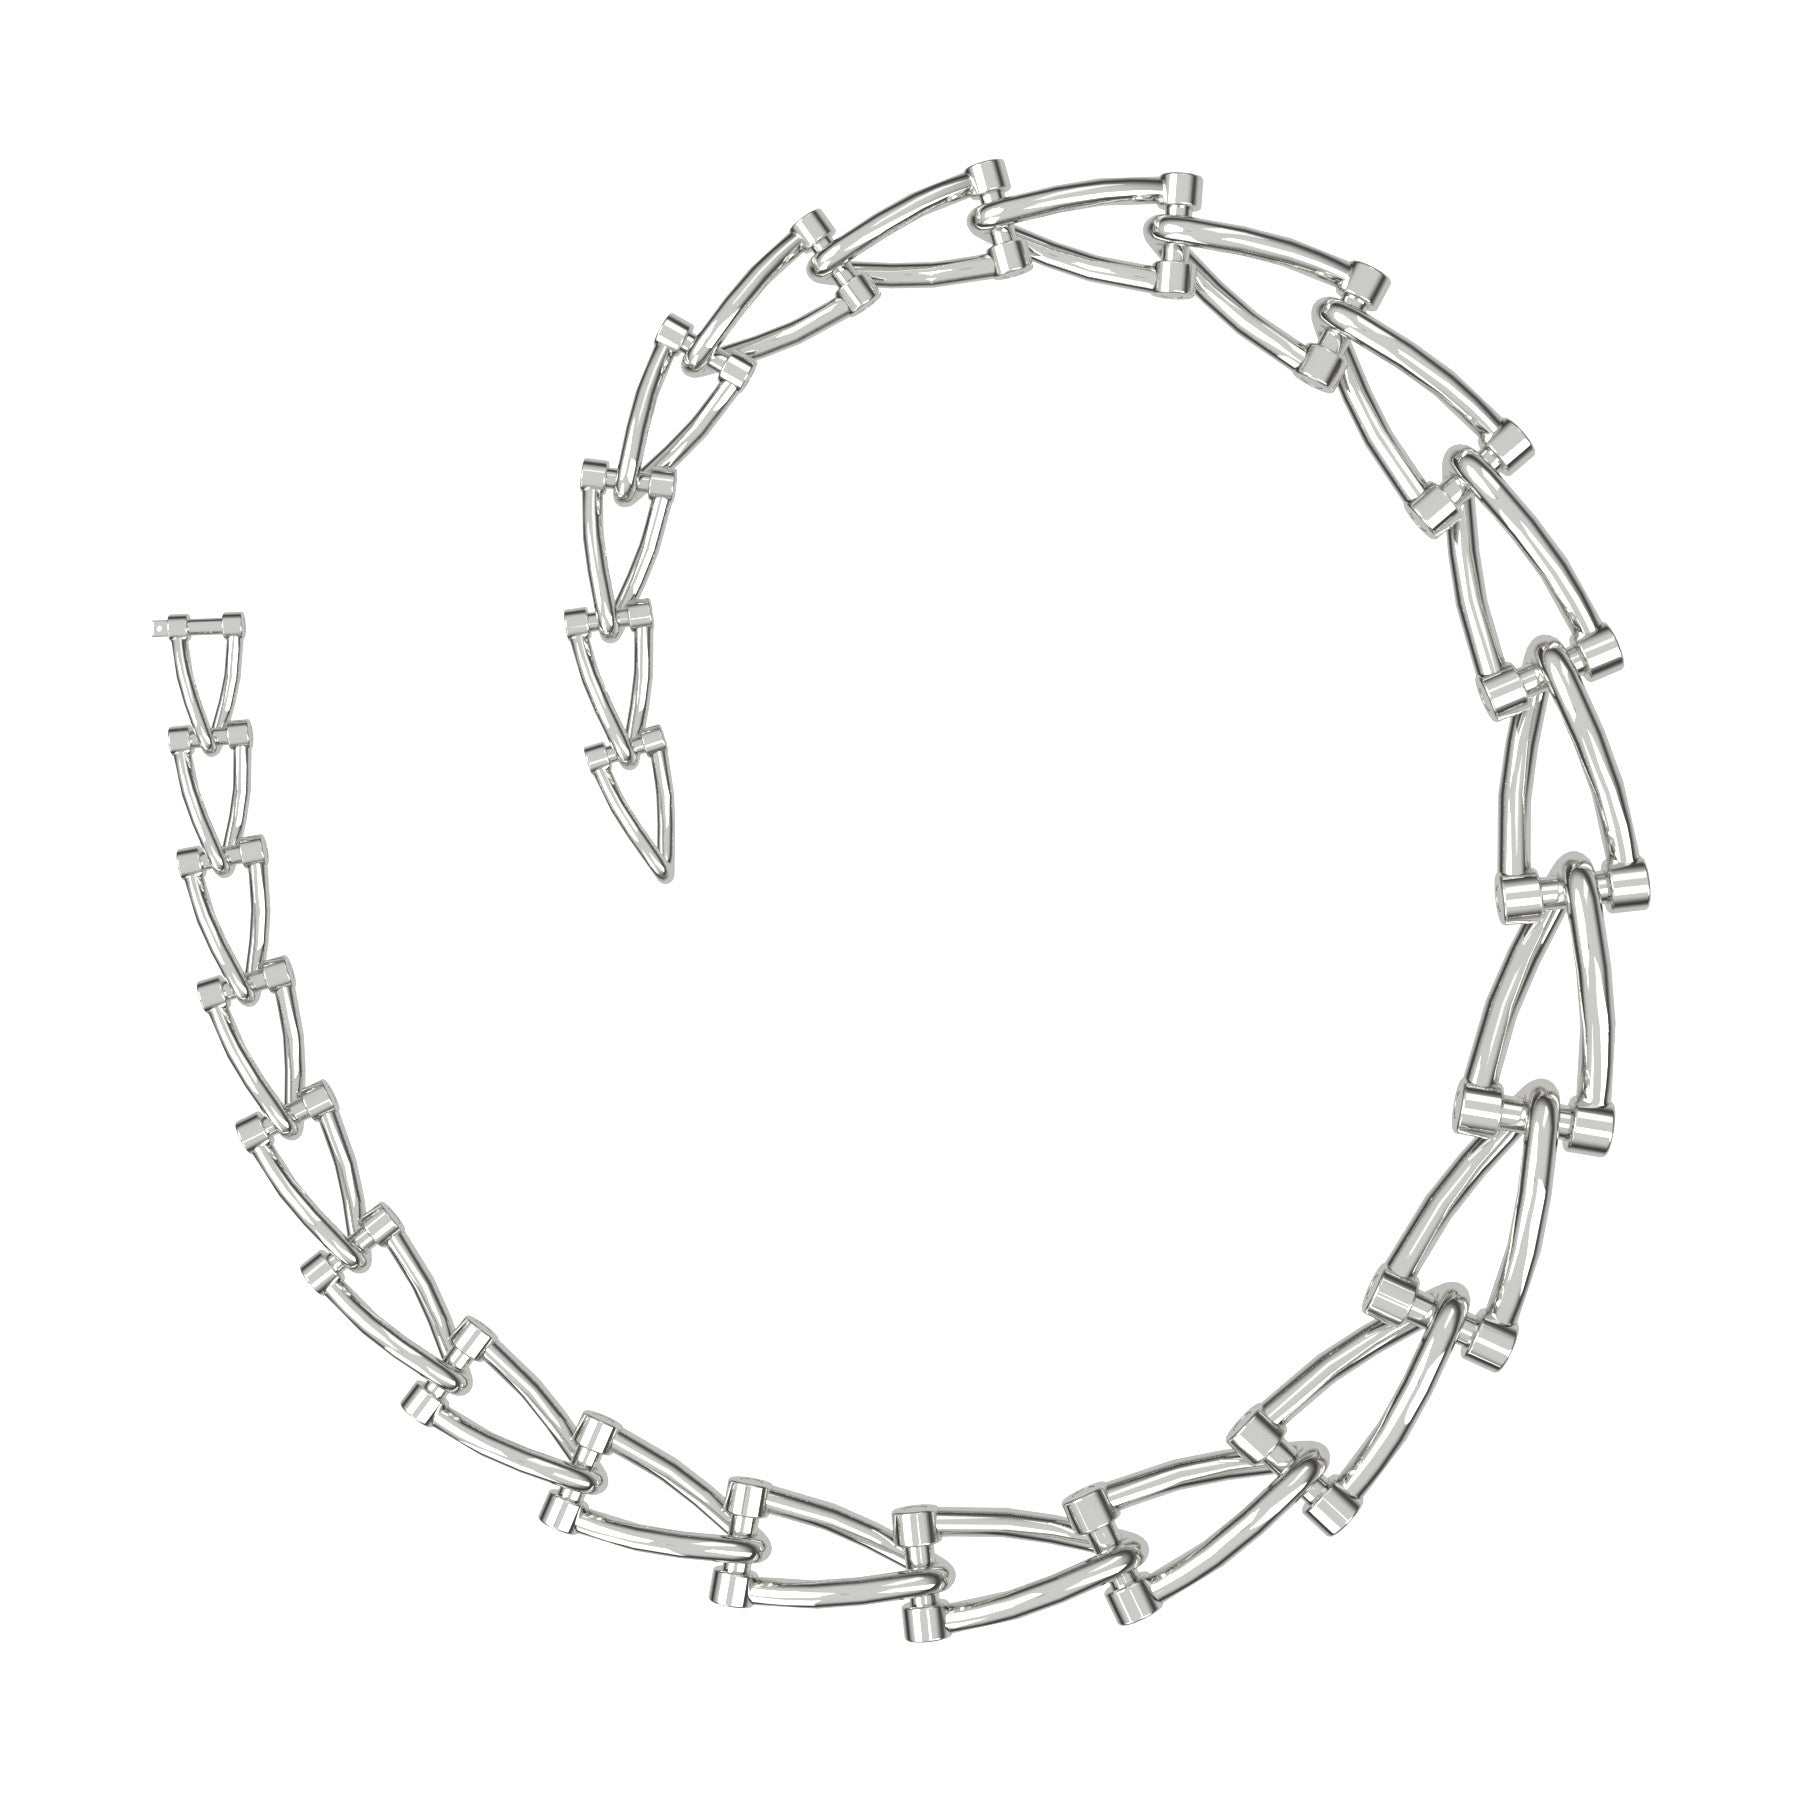 marine links necklace, 18 K white gold, weight about 141,7 to 170,1 g (5,0 to 6.0 oz), width 7,8 to 15,7 mm max